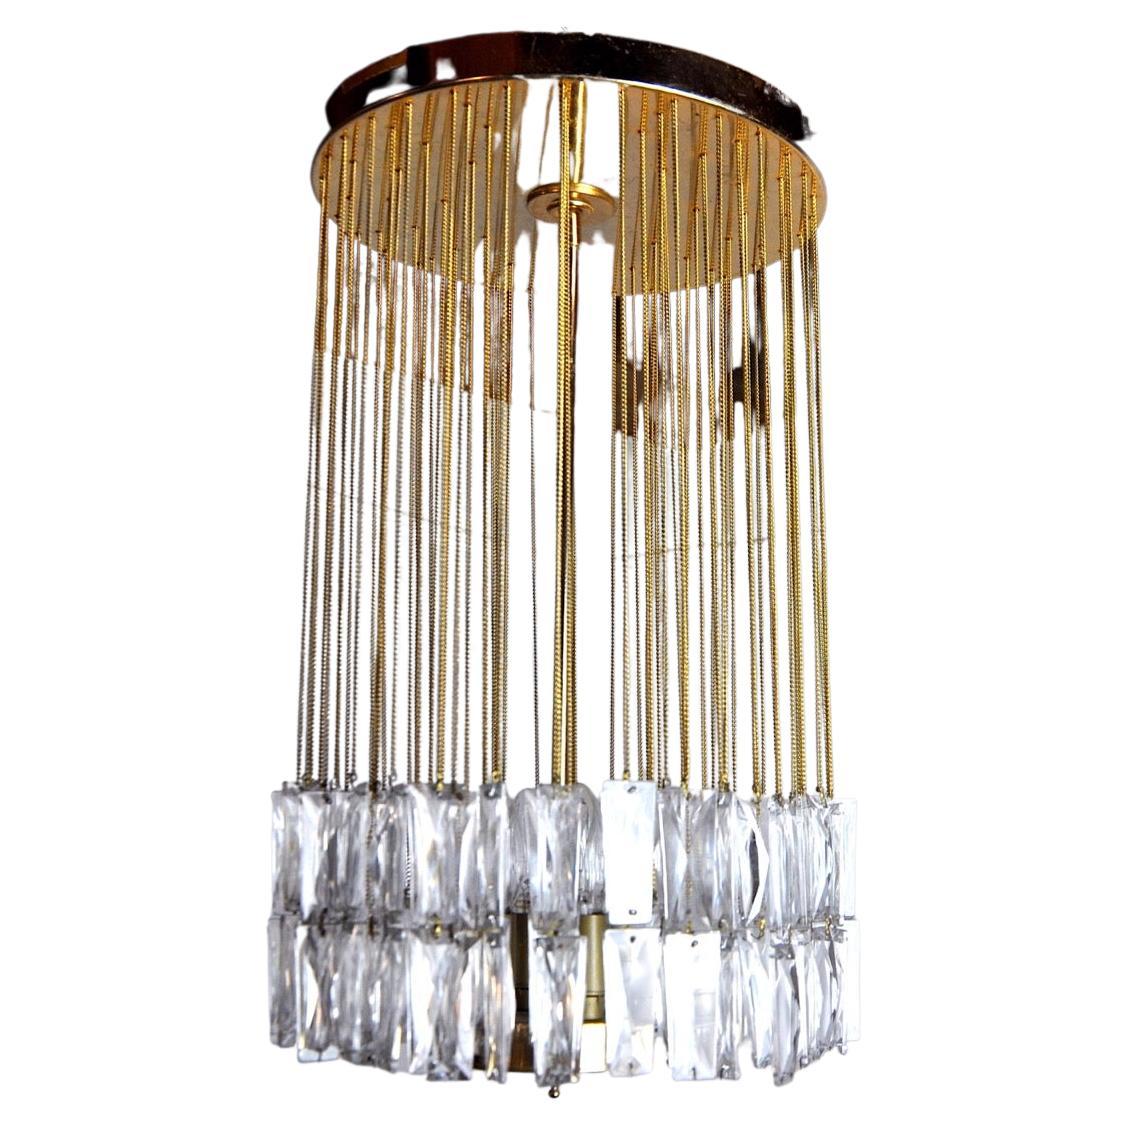 Venini ceiling lamp, cut glass, Italy, 1970s For Sale